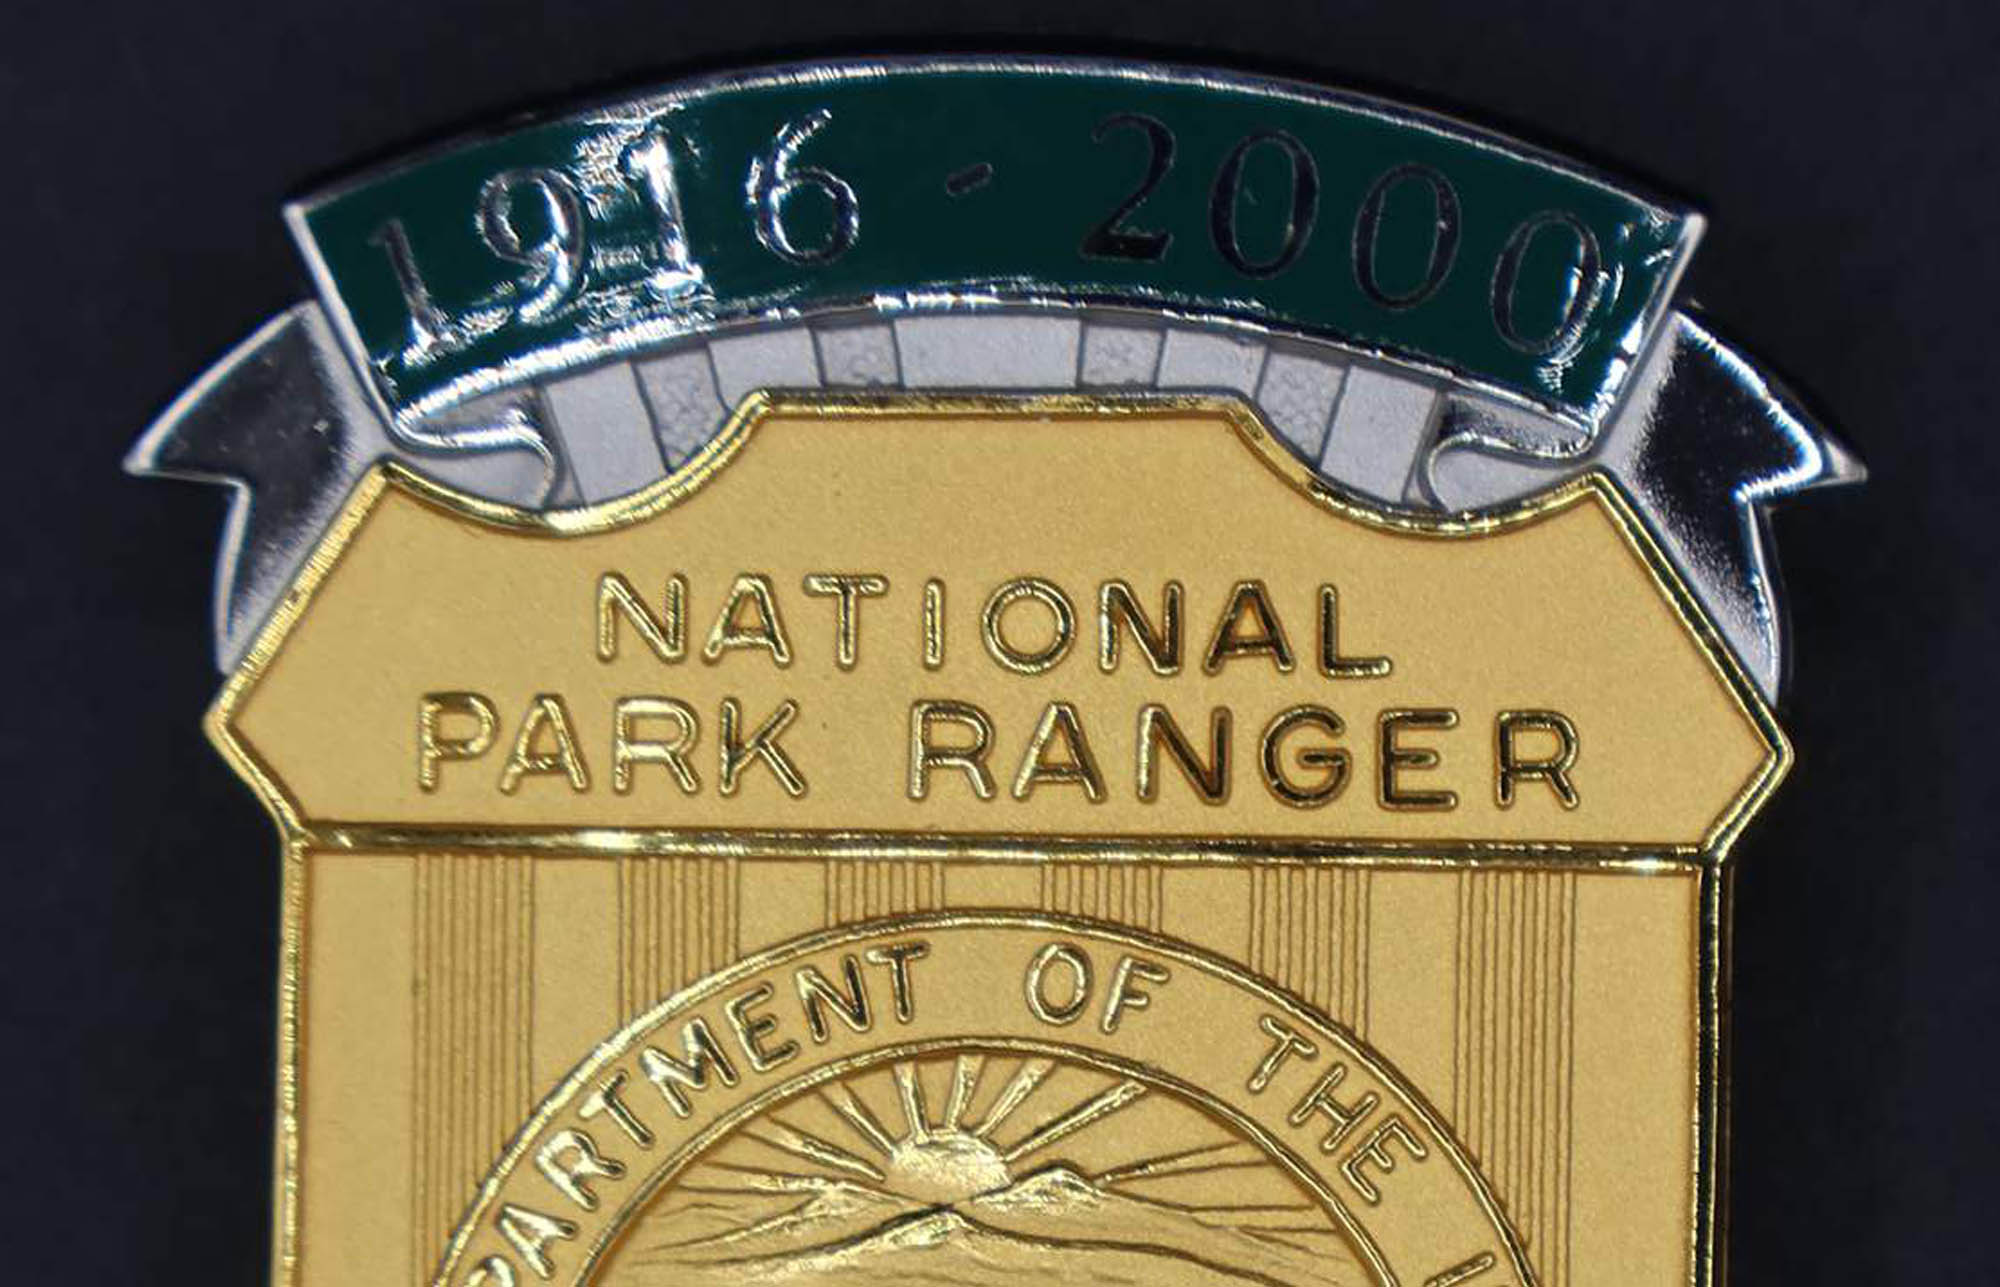 Gold shield-shaped bison badge marked National Park Ranger. Green banners at top and bottom read 1916-2000 and Preserving for Future Generations. 